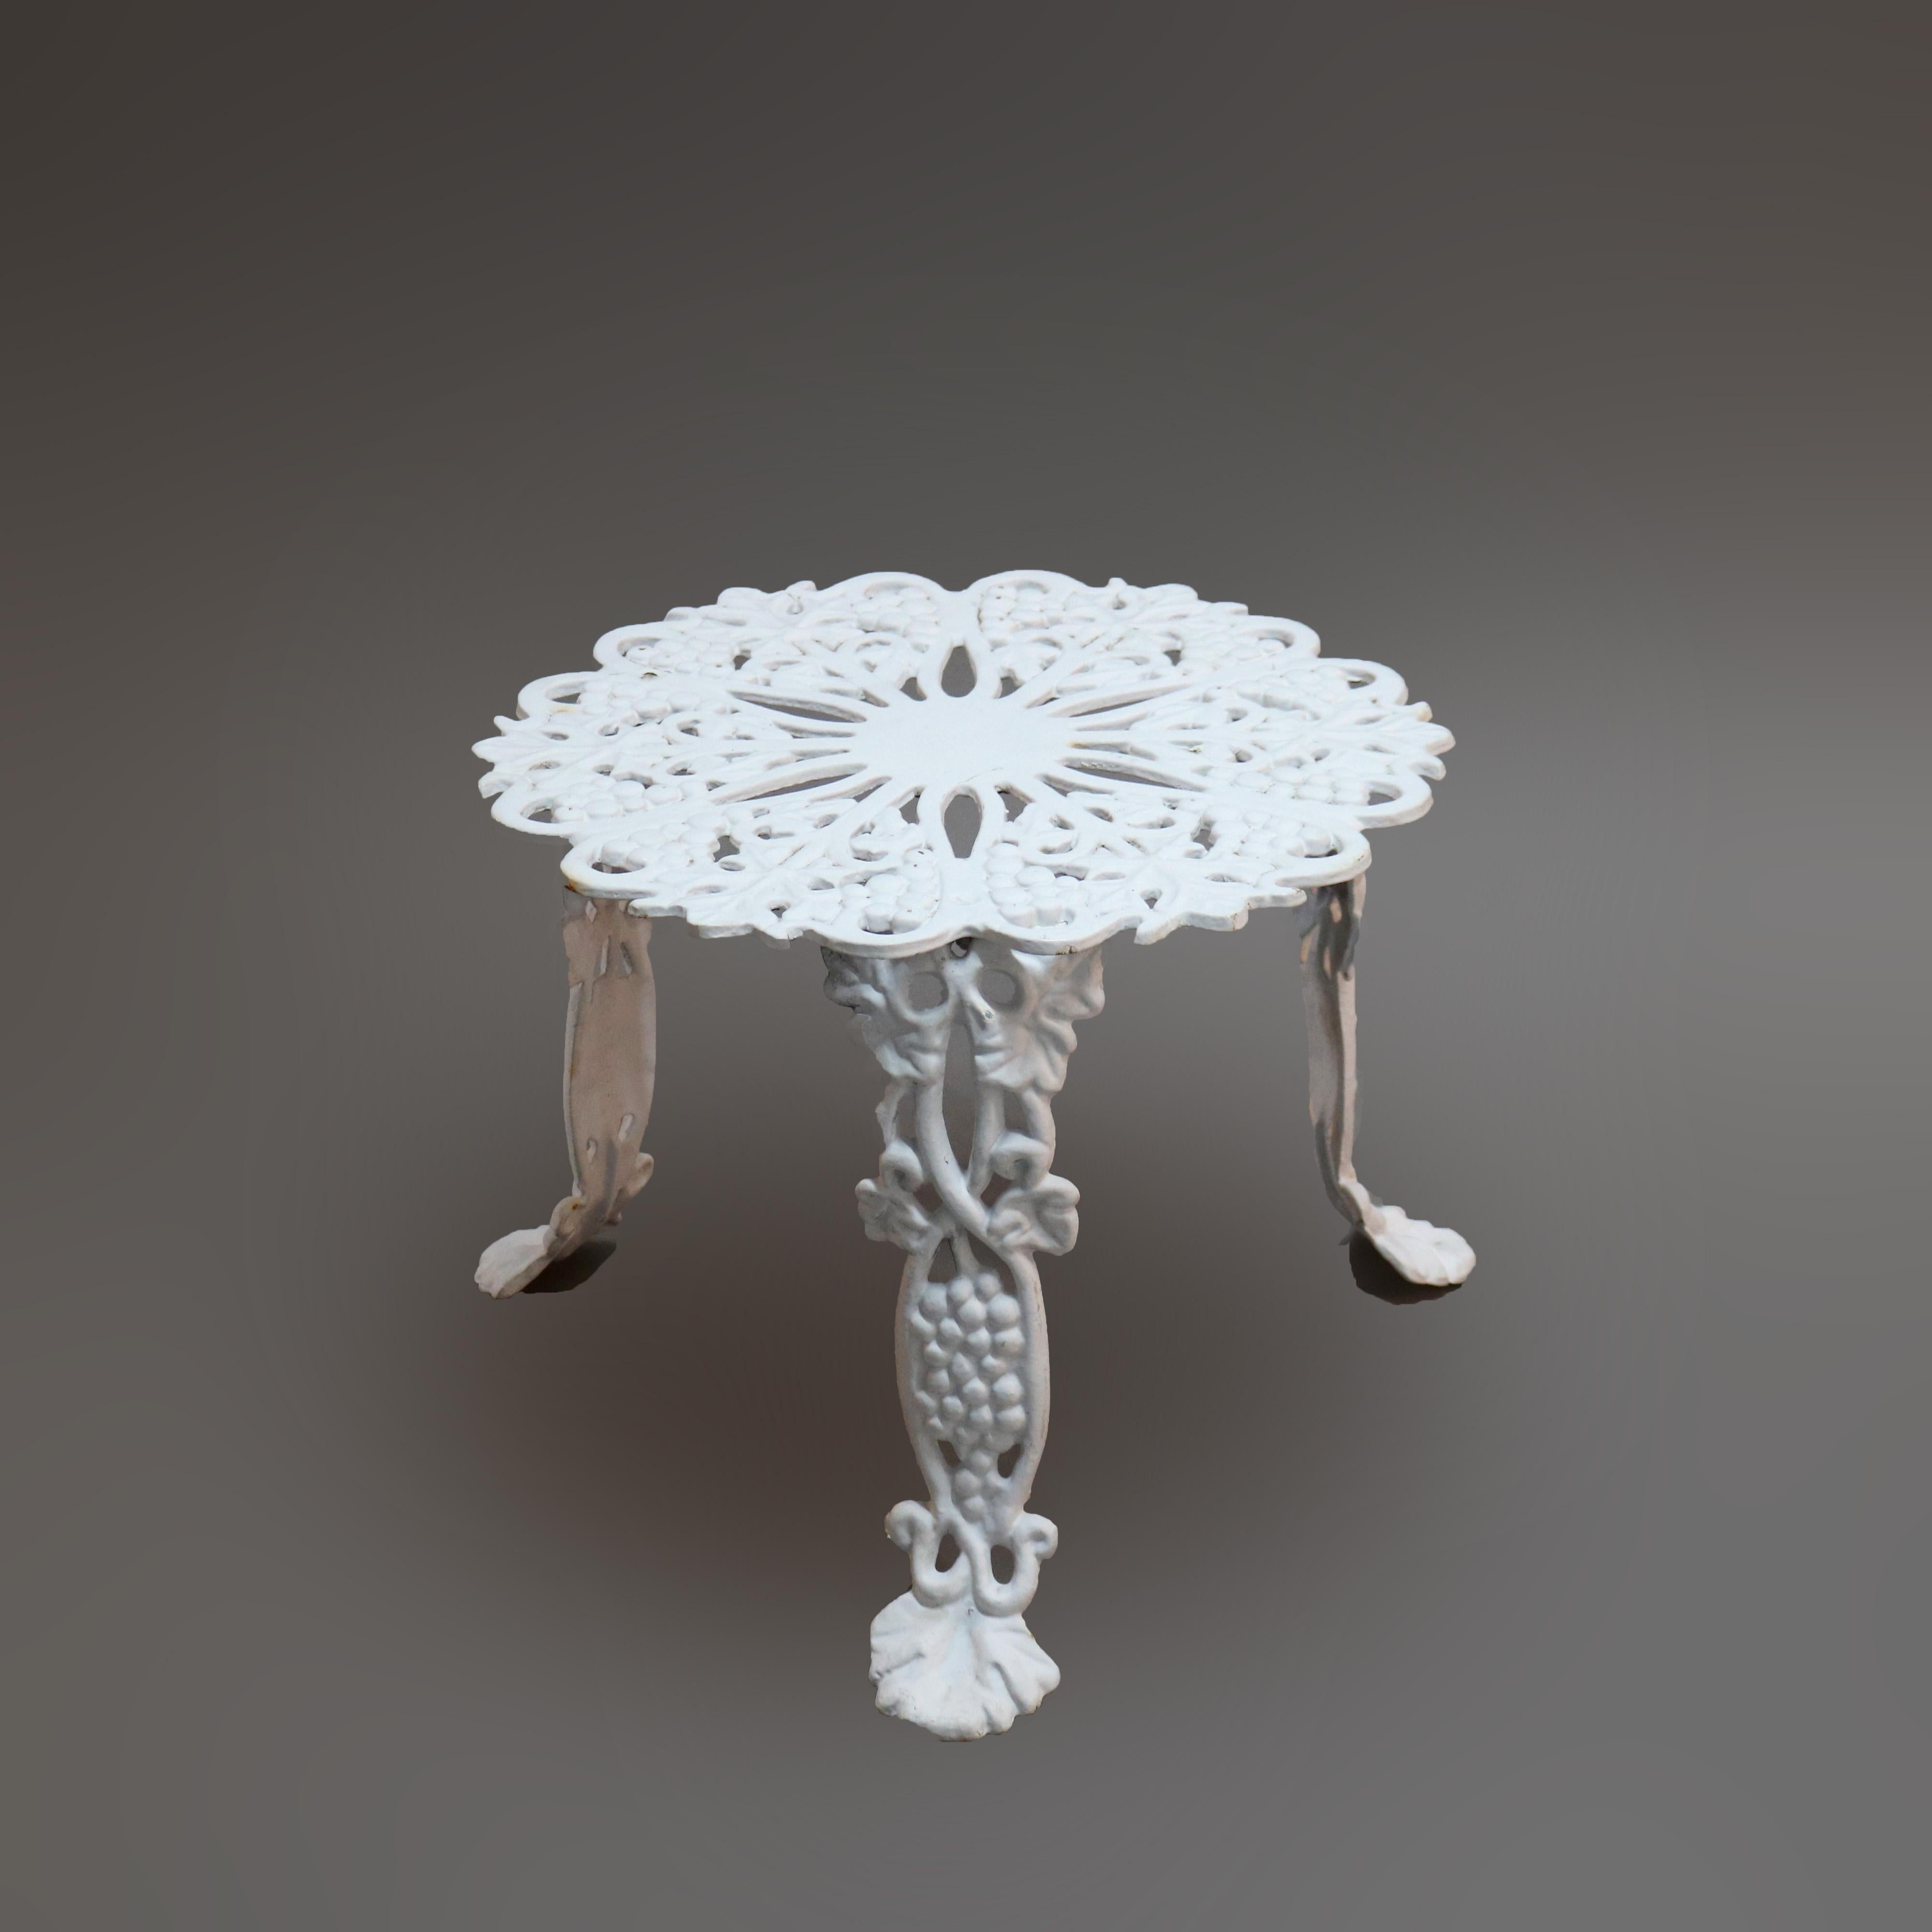 A garden set offers cast iron construction in grape and leaf pattern, painted white, set includes two arm chairs and center low table, c1940.

Measures - Chairs 26''H x 21.25''W x 21.25''D, 14'' seat height; Table 22.5''H x 22.5''W x 15.75''D.